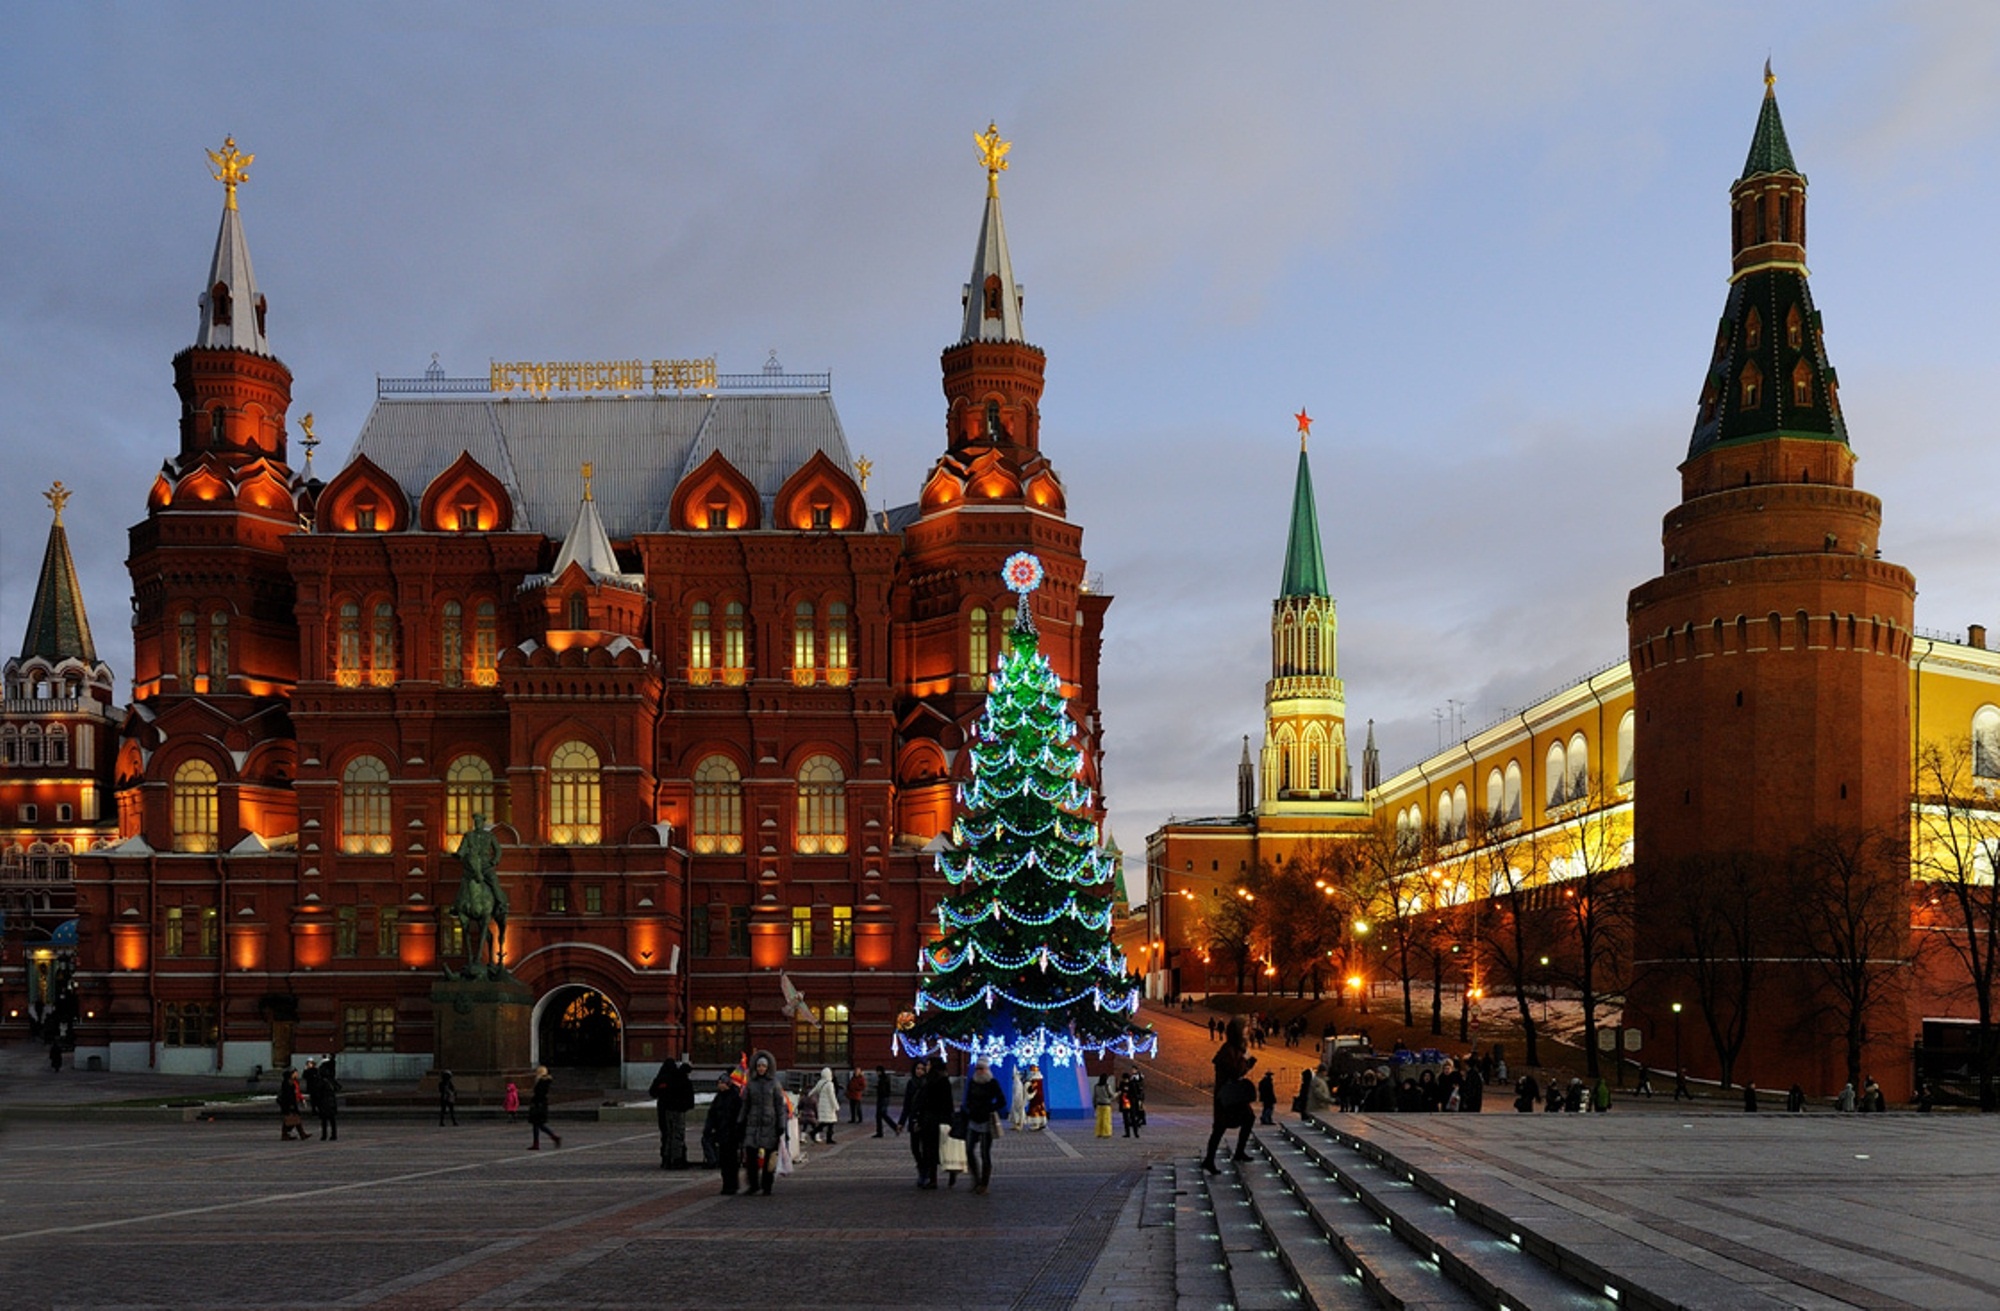 moscow, man made, red square, russia, cities